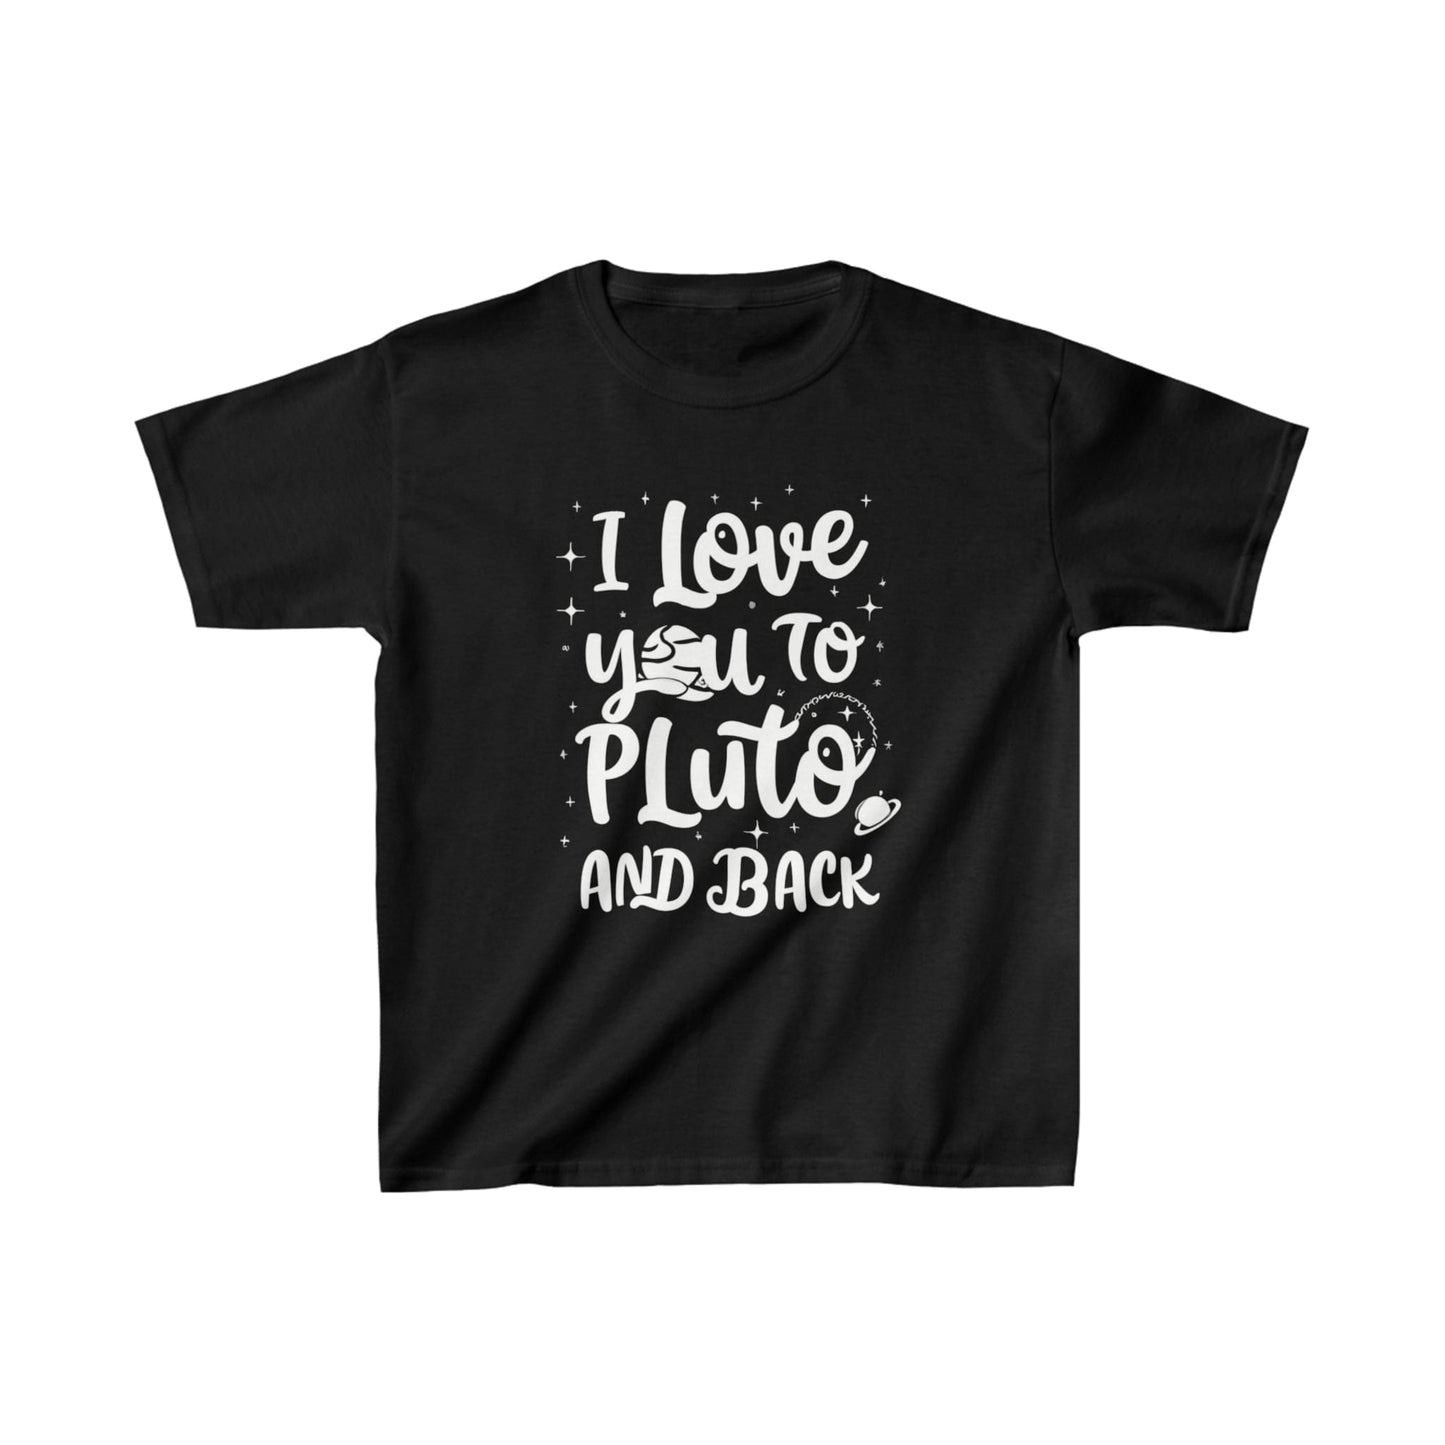 Kids clothes XS / Black Youth Pluto And Back T-Shirt